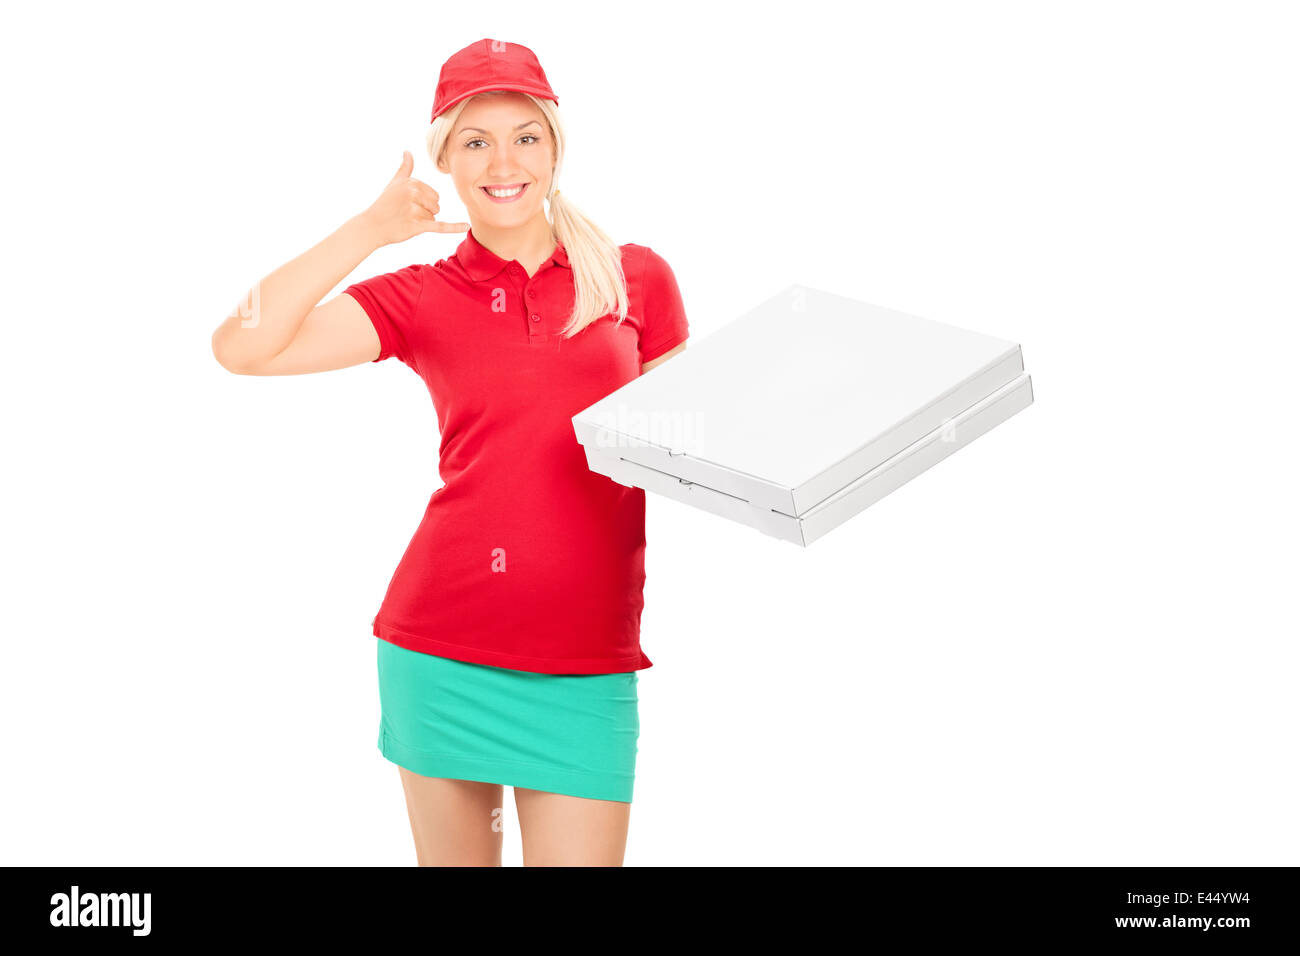 Delivery girl making a call sign and holding pizza boxes Stock Photo